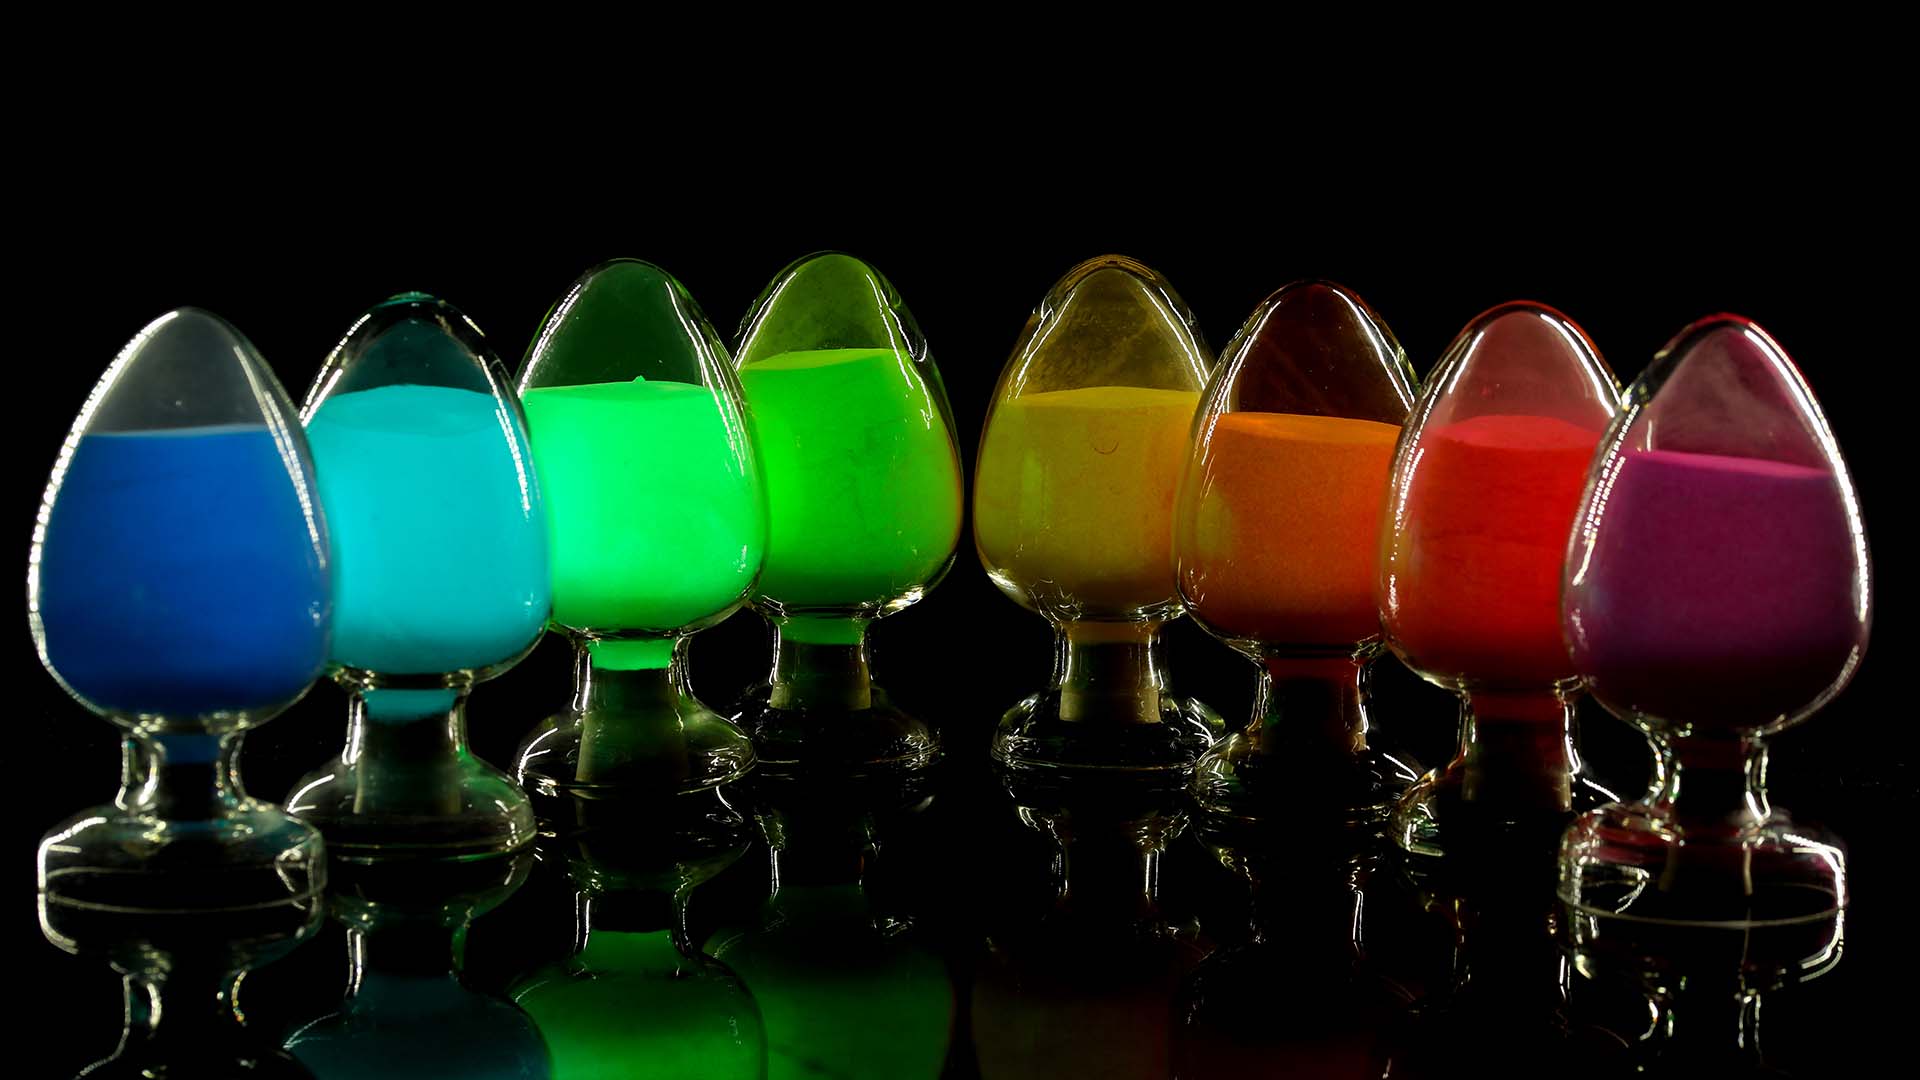 What is the glow in the dark pigment?